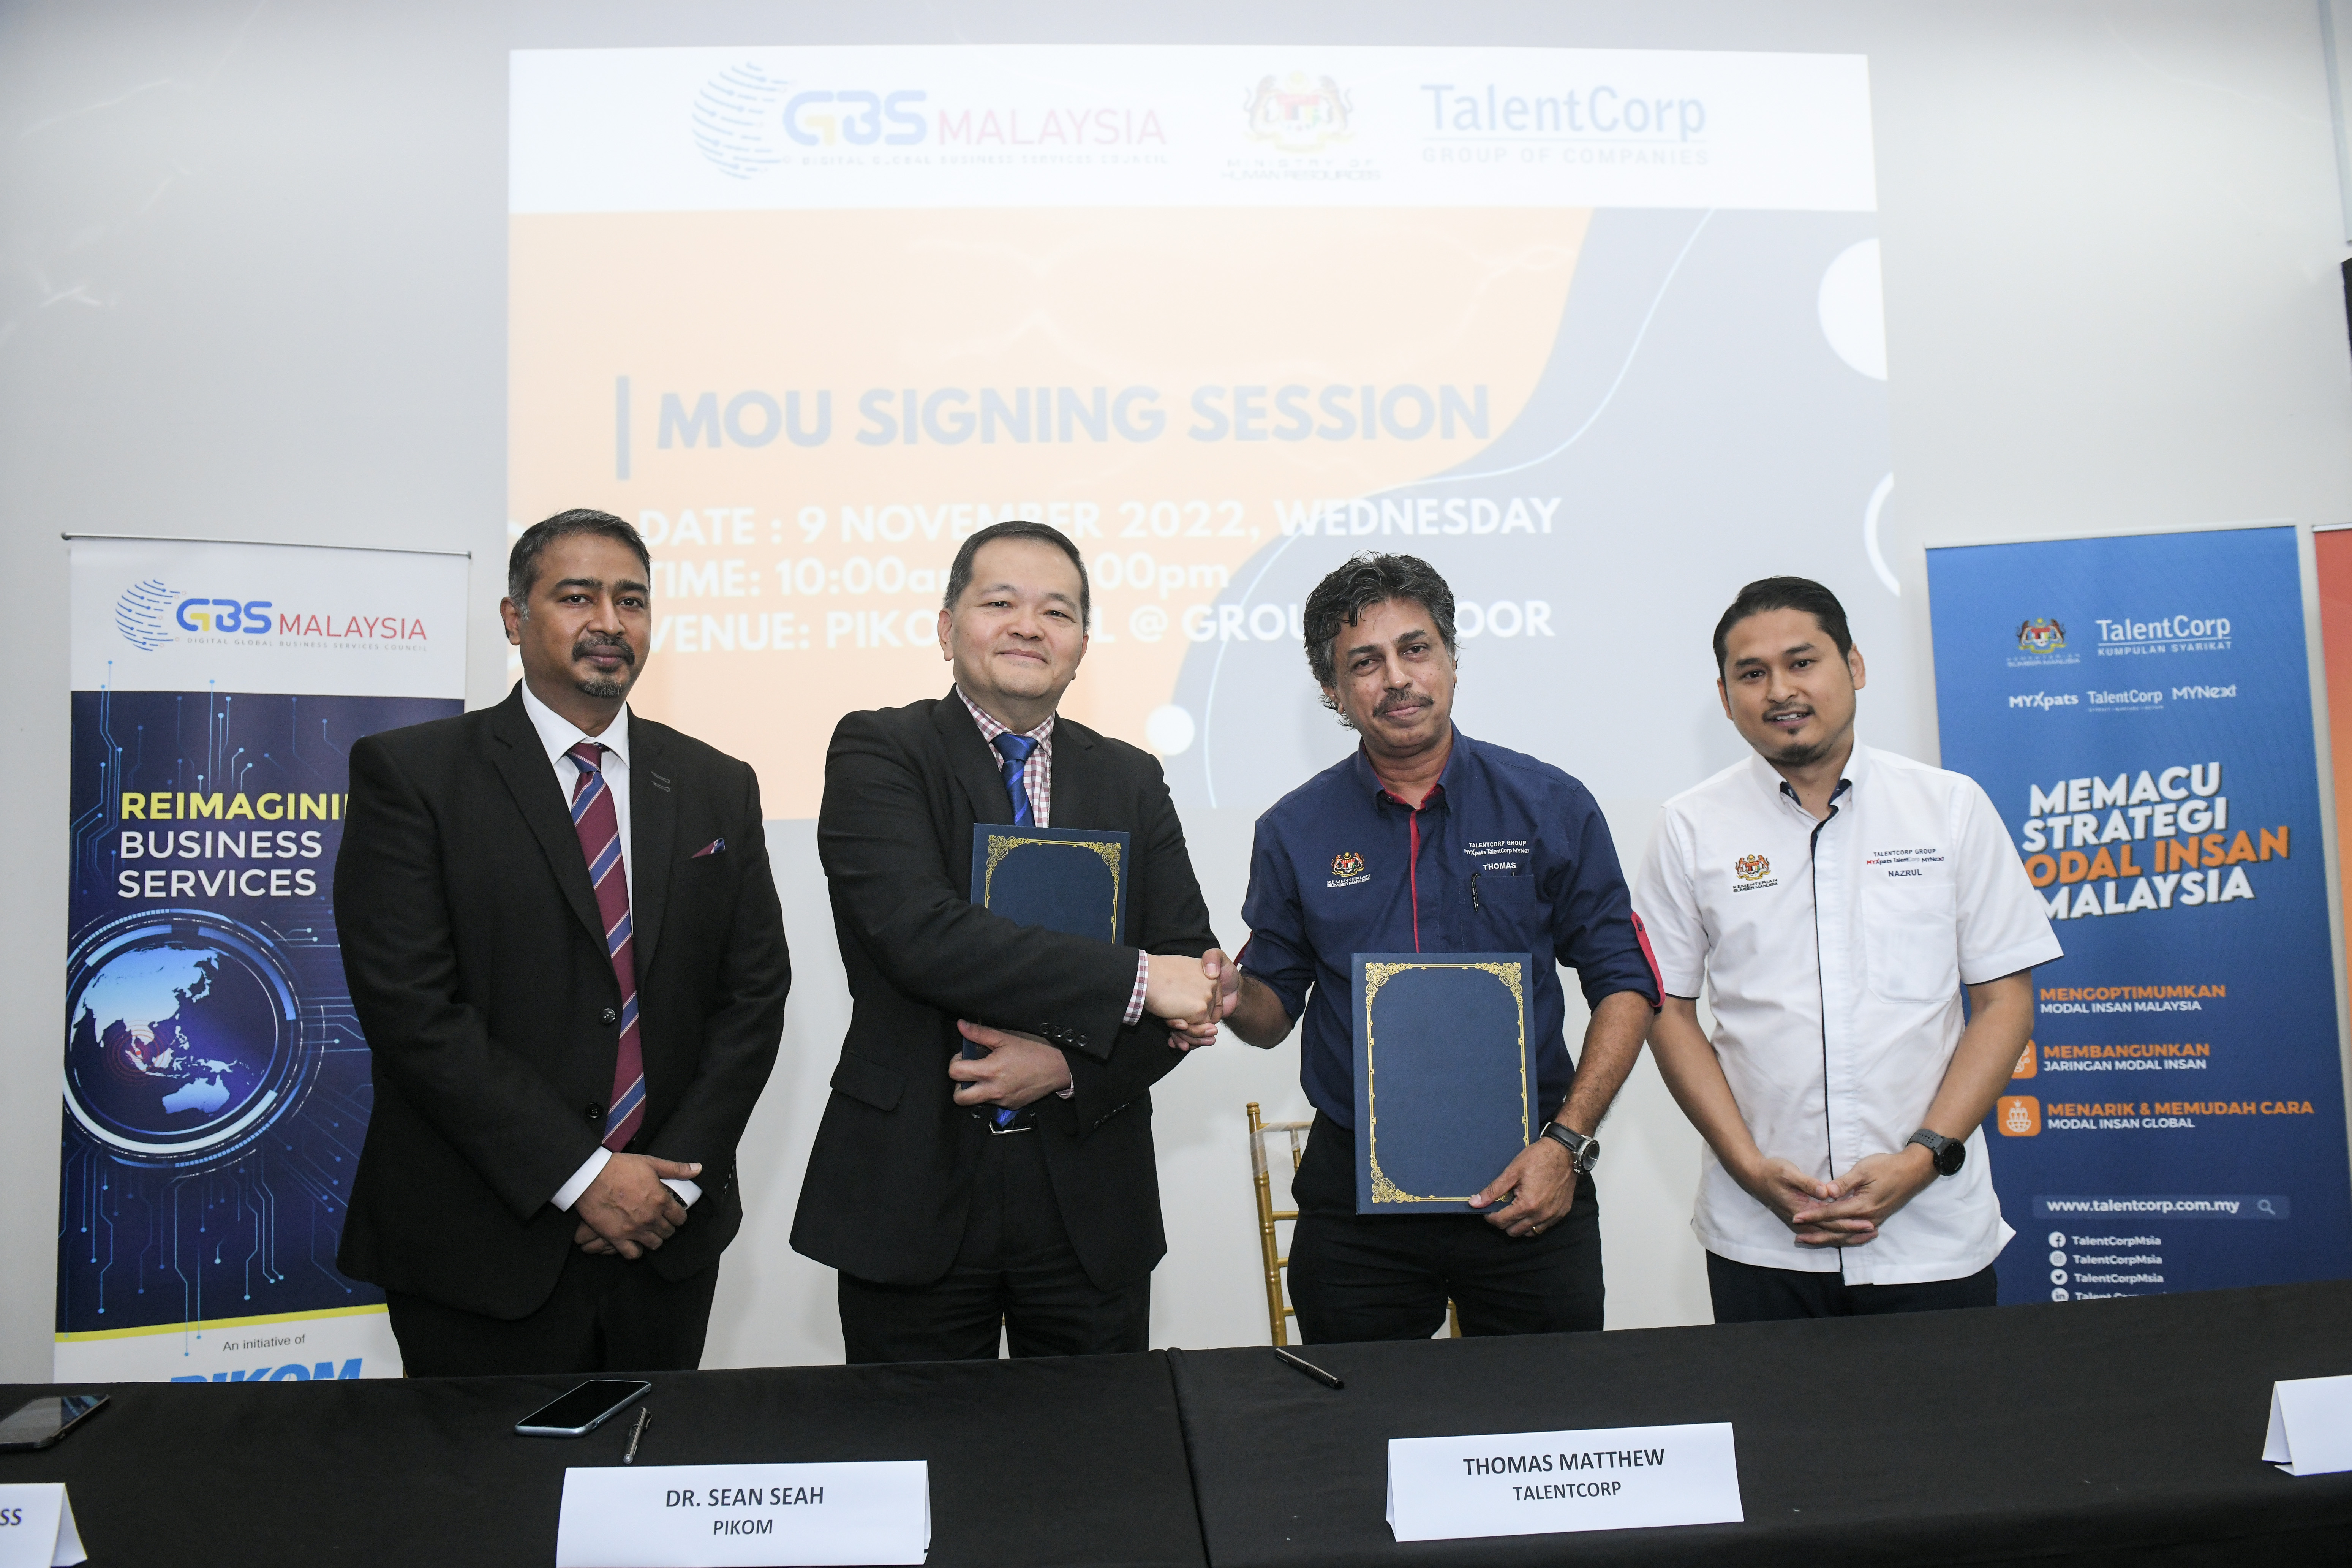 (Left to right) Anthony Raja Devadoss, Sean Seah, Thomas Mathews and Nazrul Aziz at the MoU Signing Ceremony between PIKOM and TalentCorp.